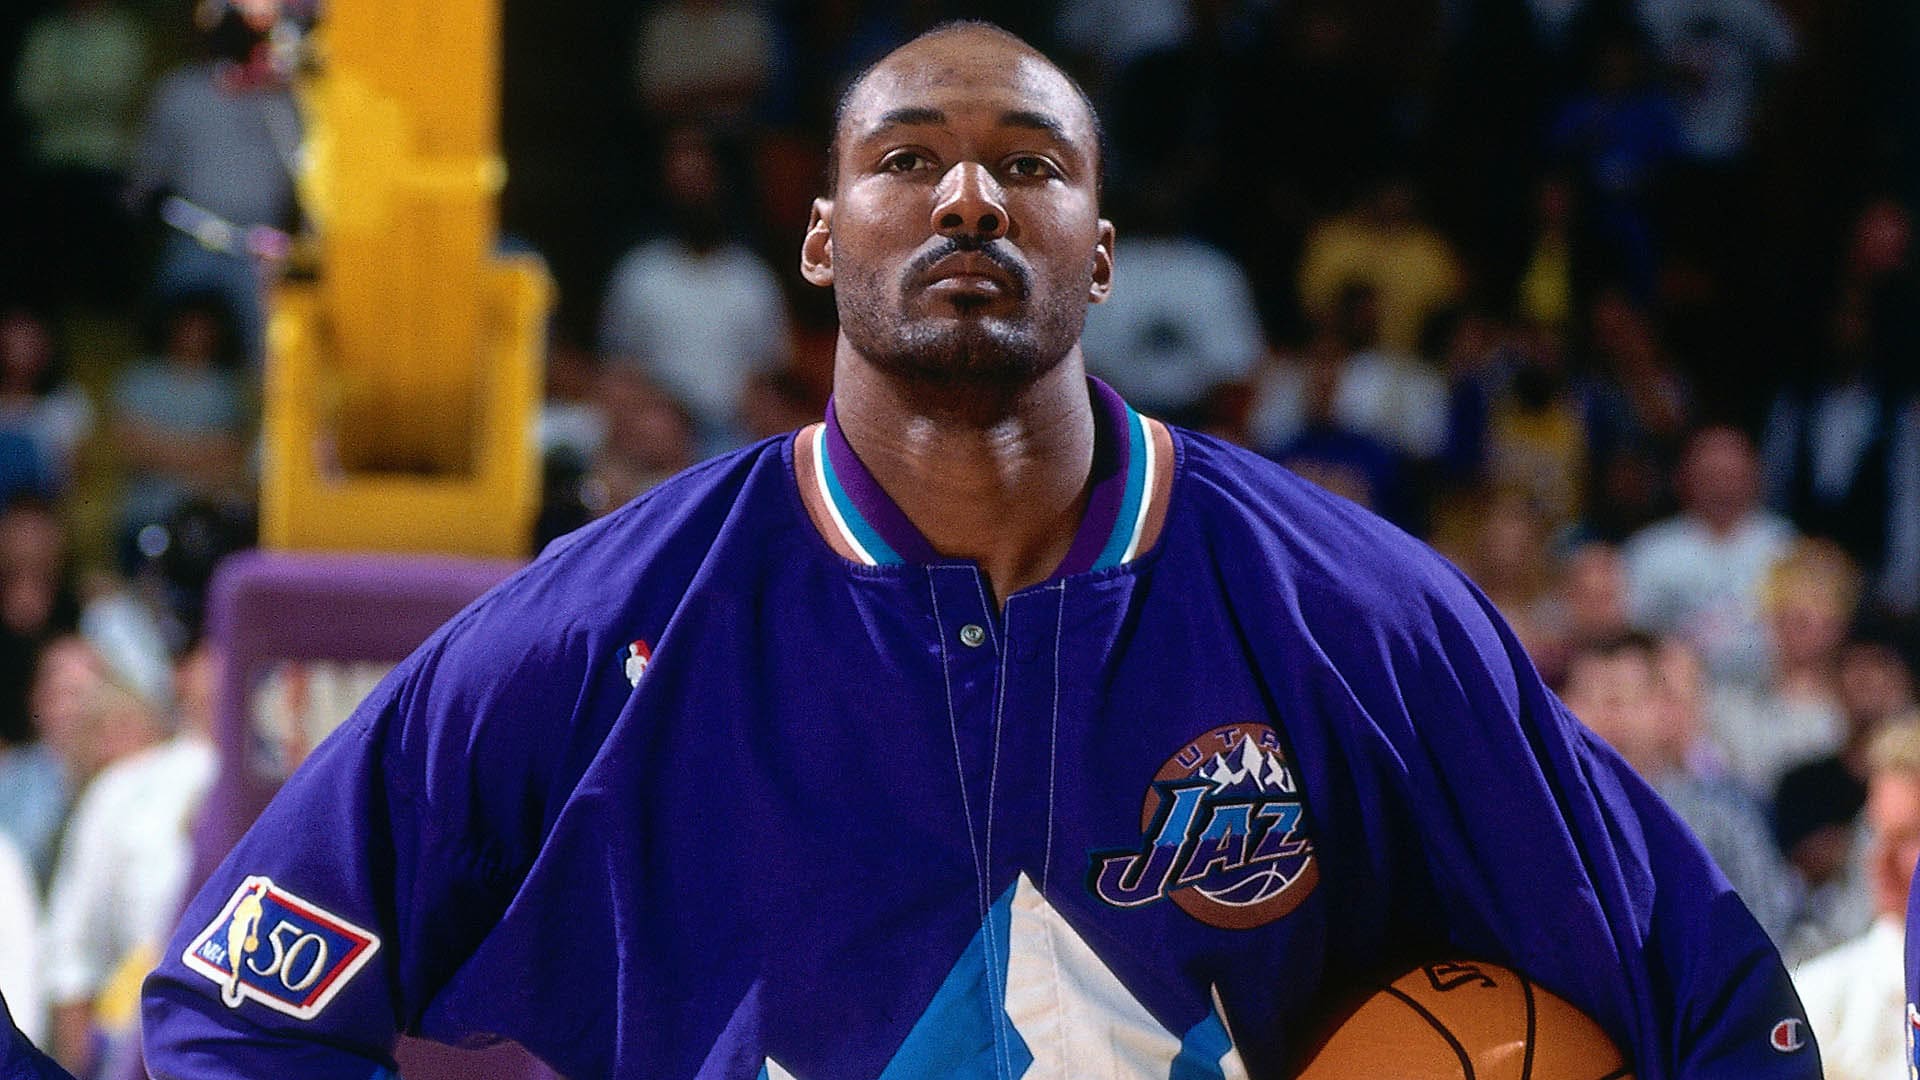 Karl Malone pulls in $5 million with auction of 1992 Dream Team